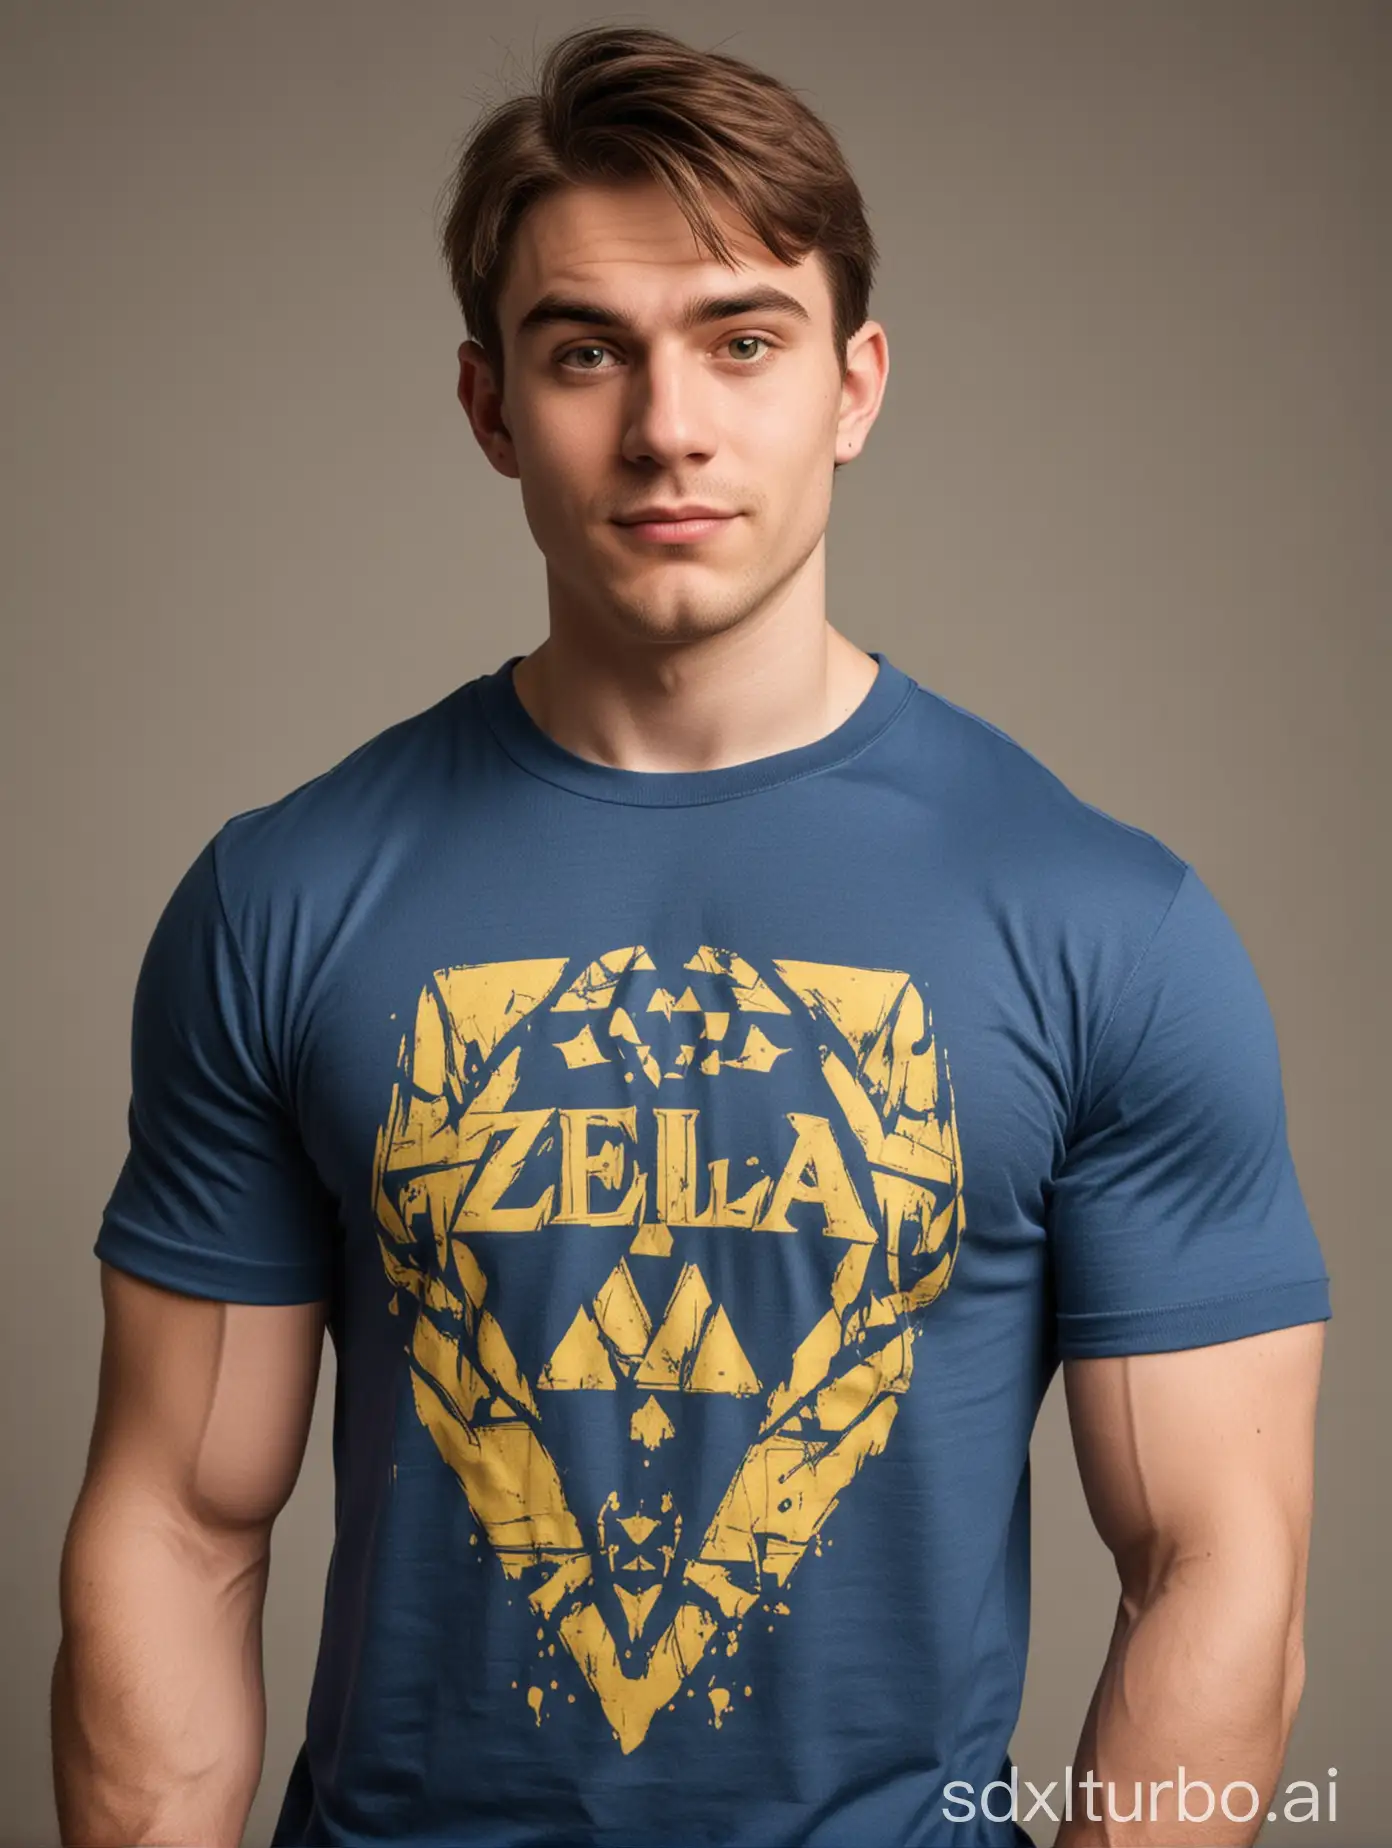 very rich and autistic young man with Zelda T shirt with big muscles